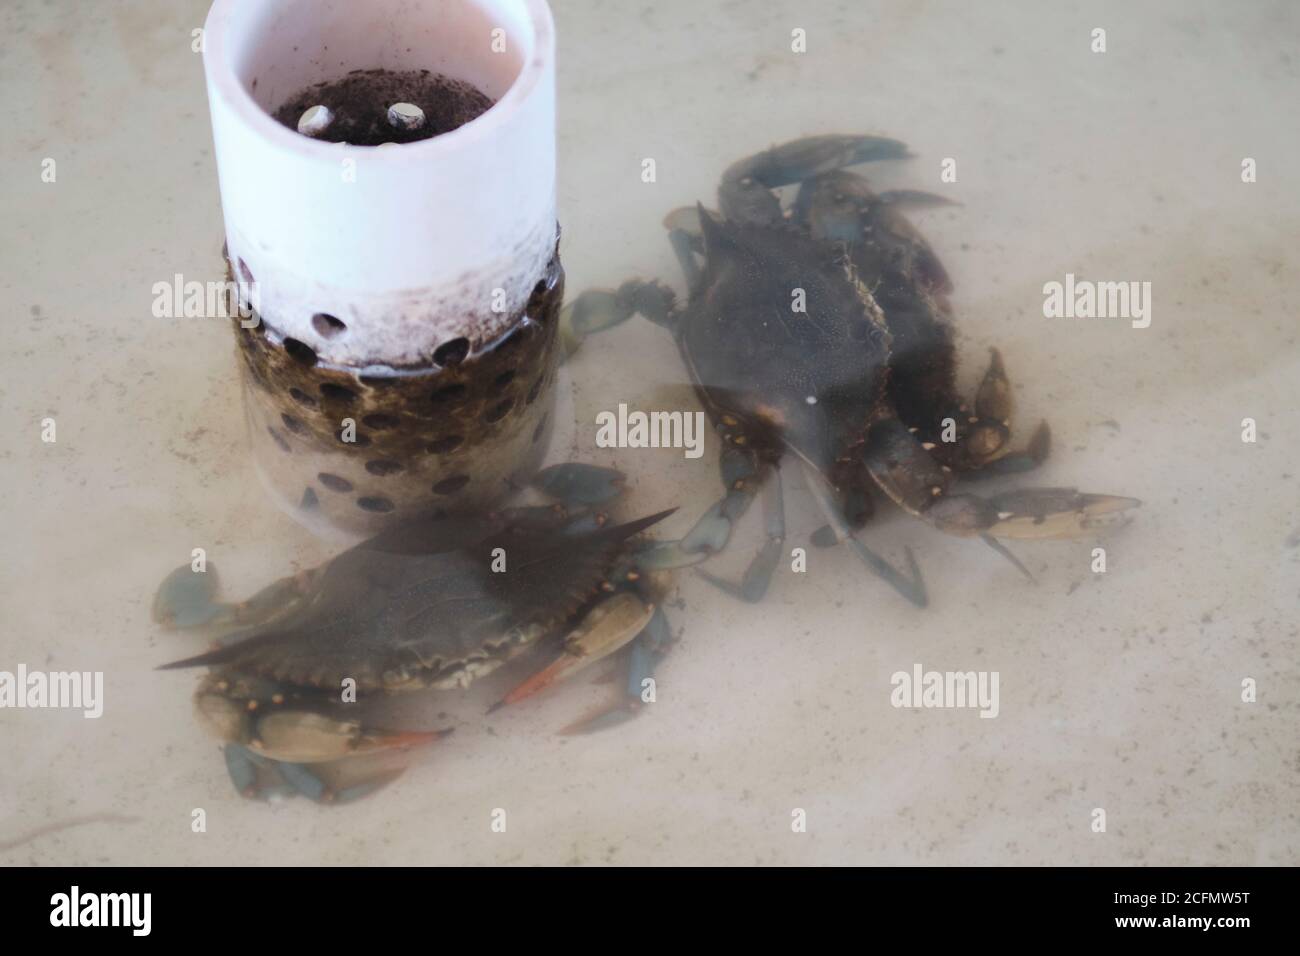 Two live Chesapeake Bay blue crabs (Callinectes sapidus) in an aerated tank. This crab is native to Western Atlantic Ocean from Cape Cod to Argentina. Stock Photo